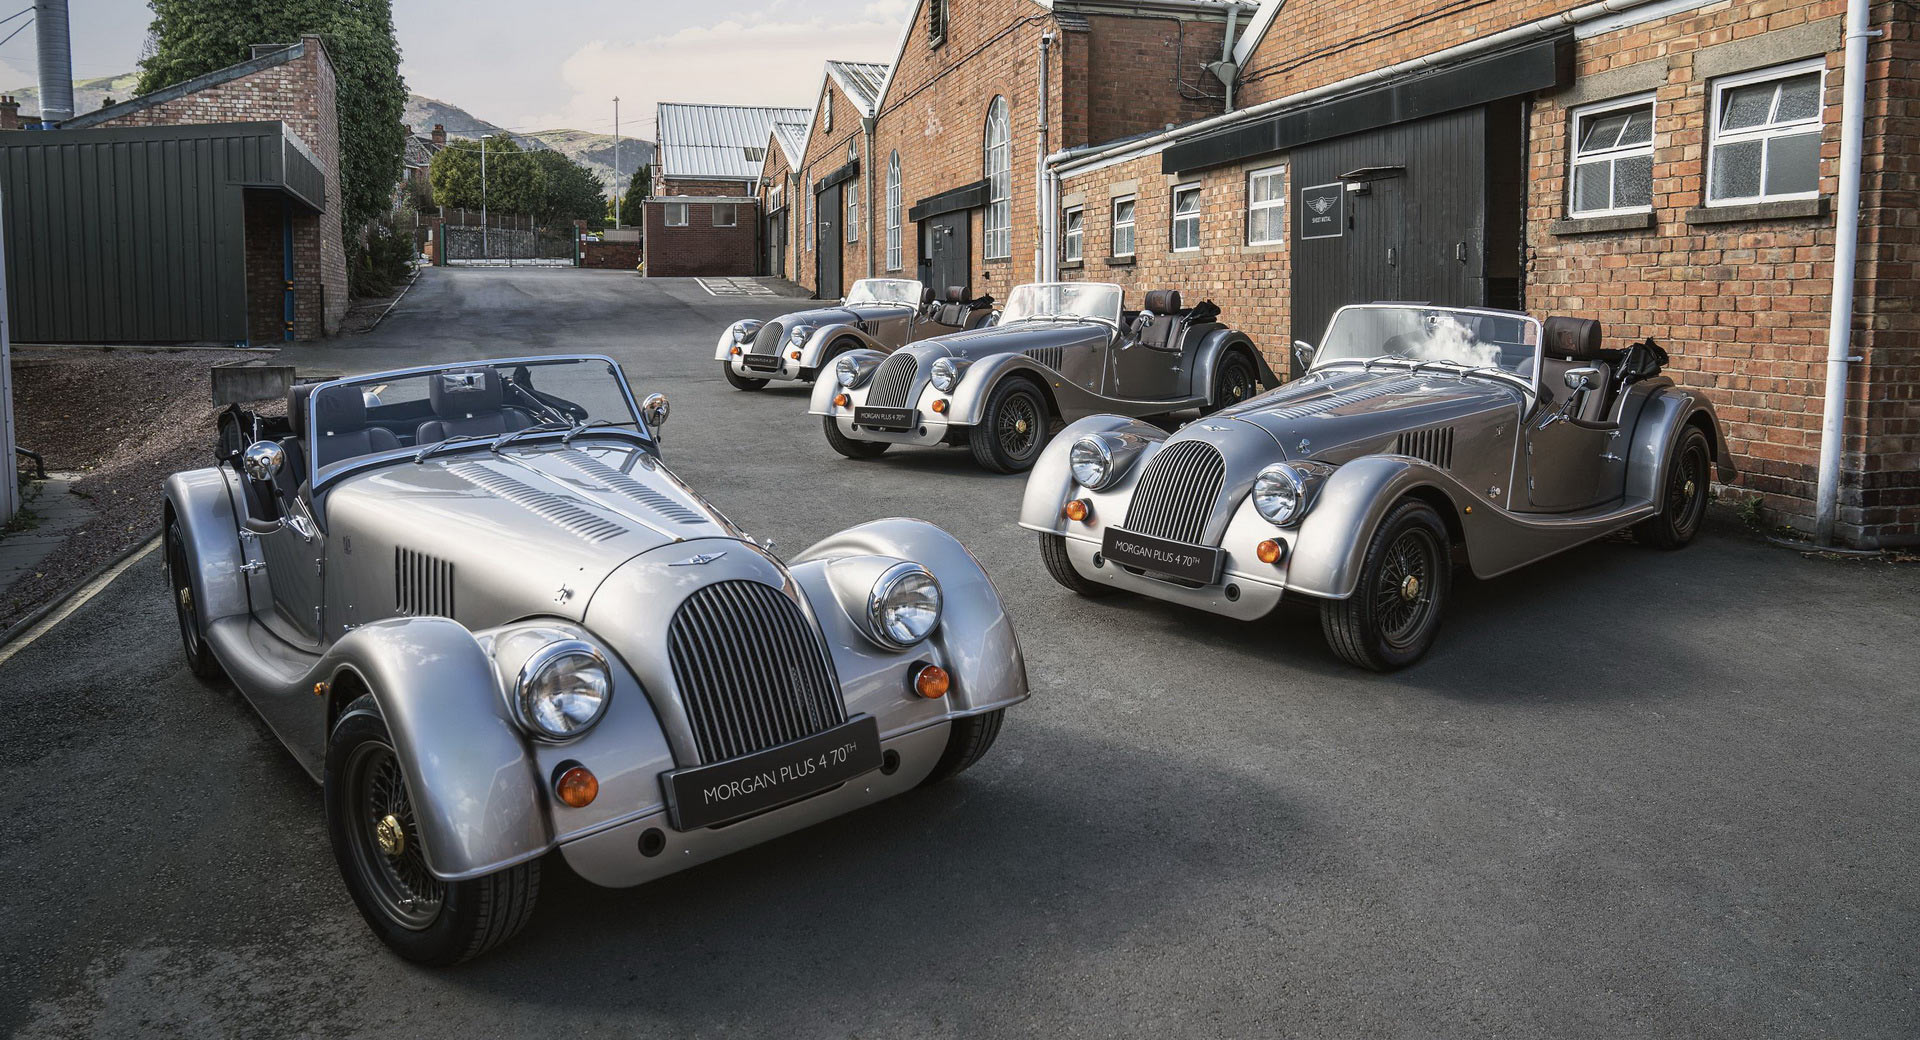 Morgan Builds A Handful Of Its Last Ladder Chassis Plus 4 Before